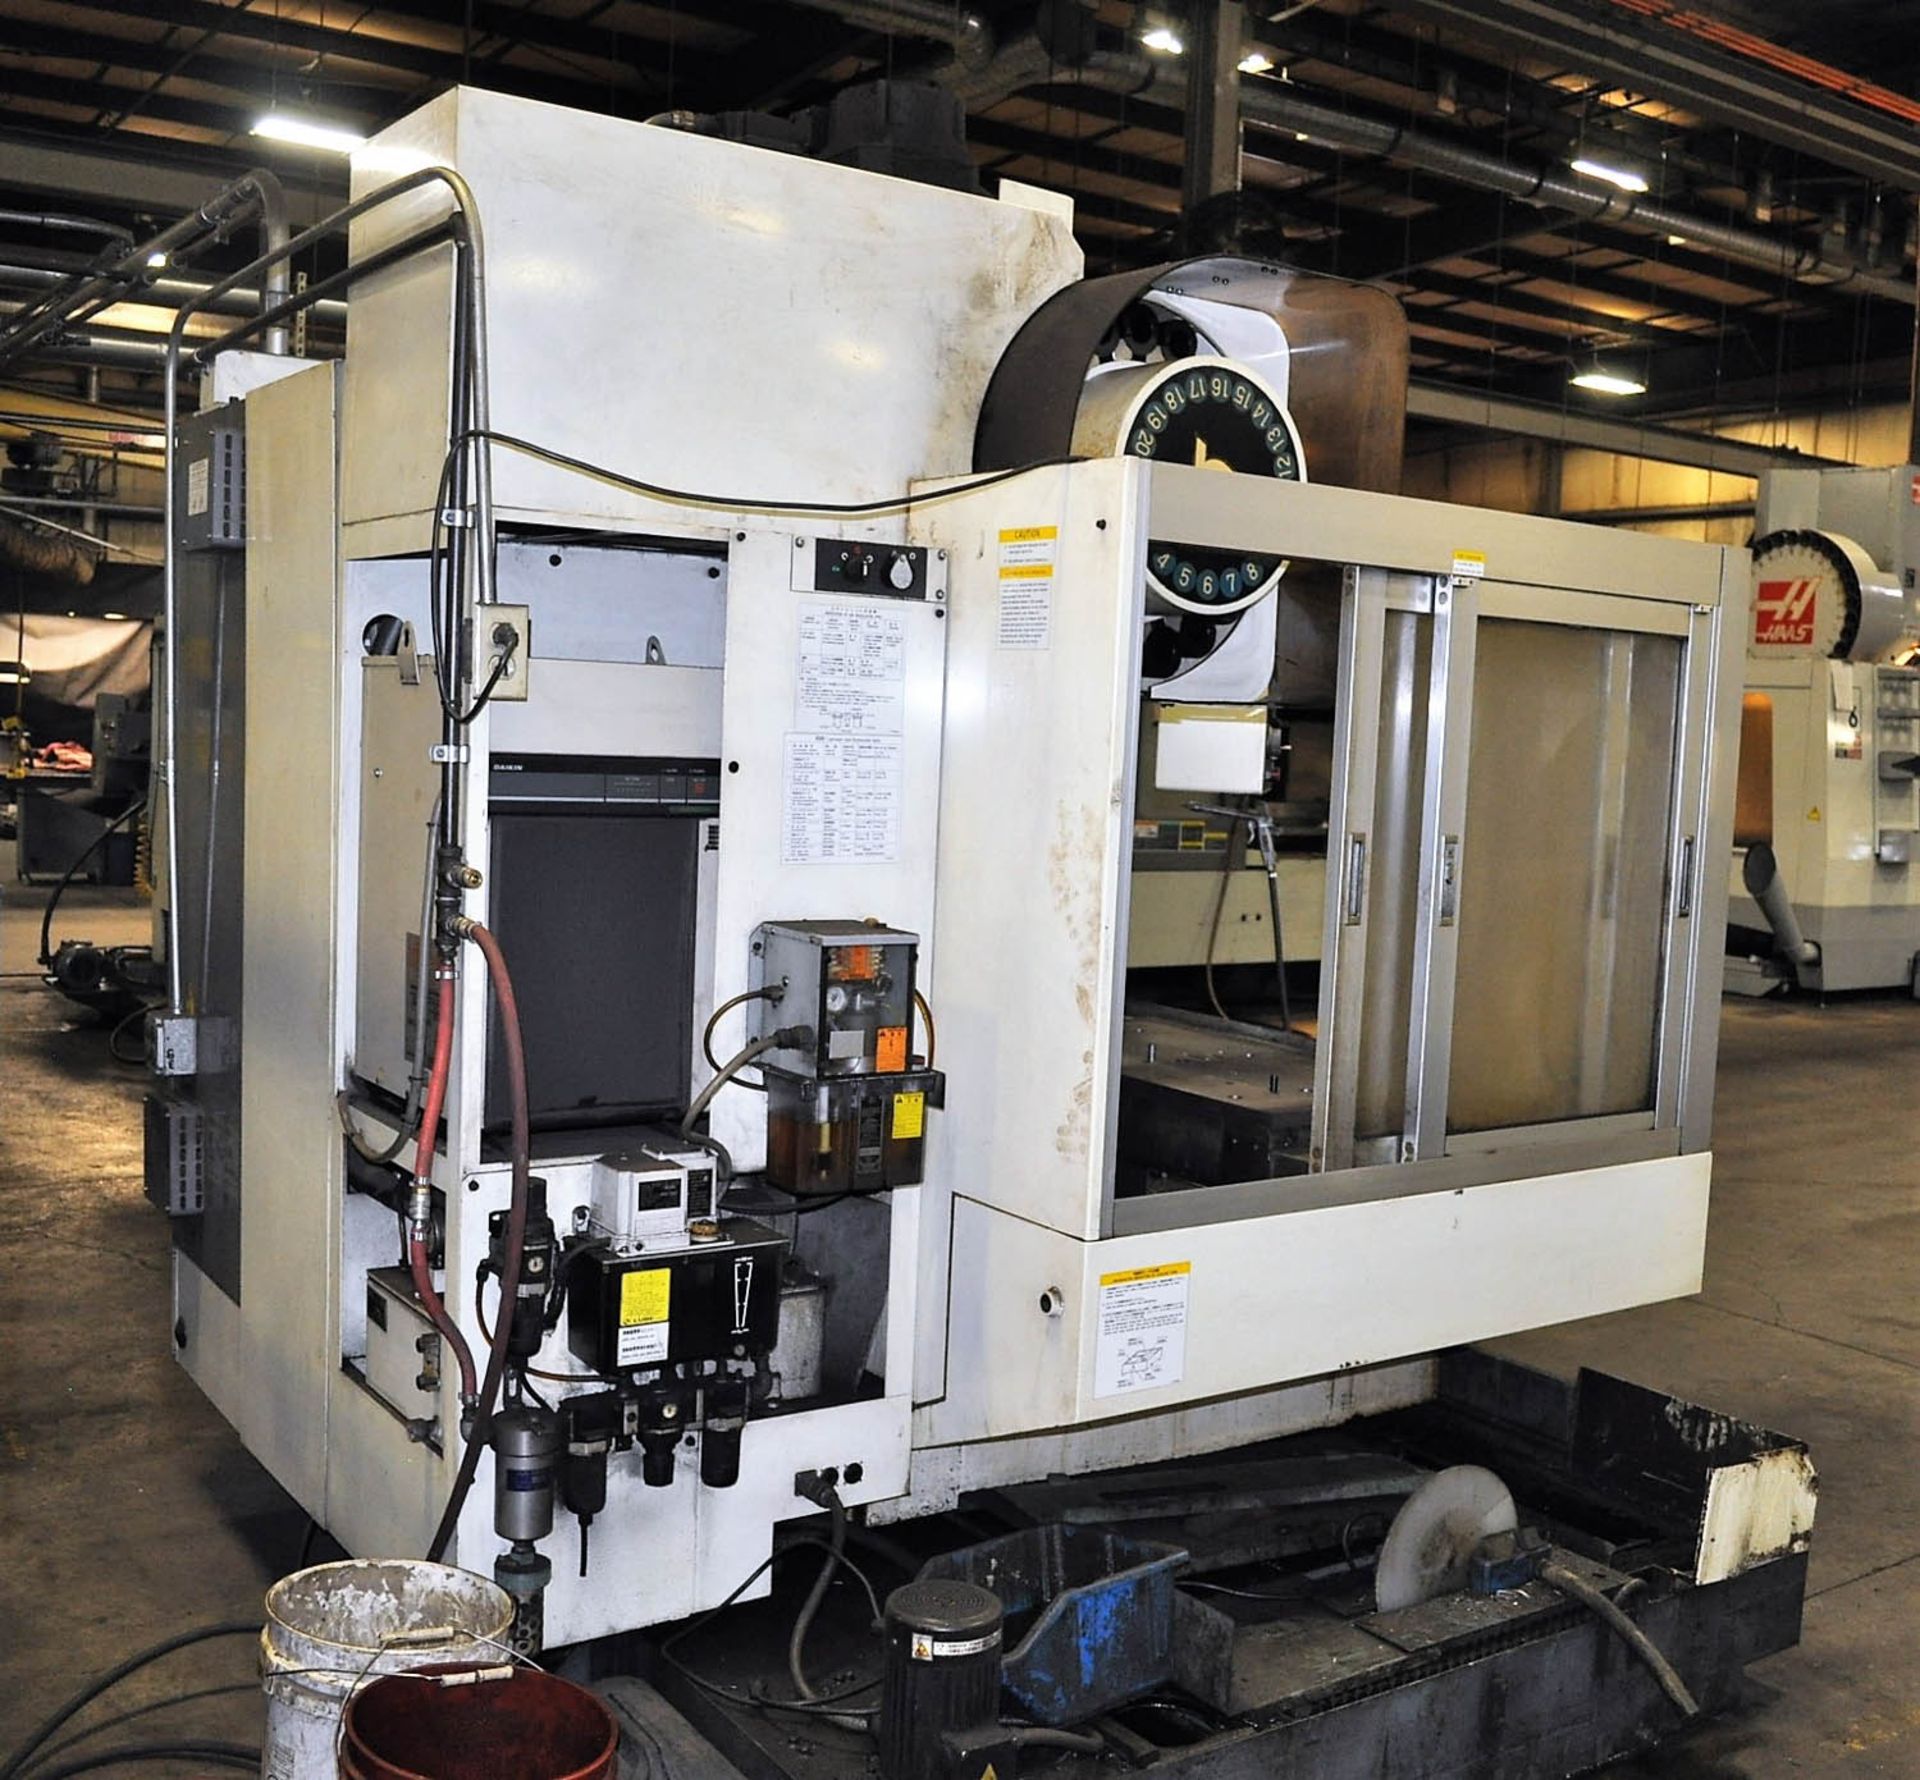 KITAMURA MYCENTER MDL. 3X CNC VERTICAL MACHINING CENTER, WITH 10,000 RPM, 20-POSITION AUTOMATIC TOOL - Image 6 of 8